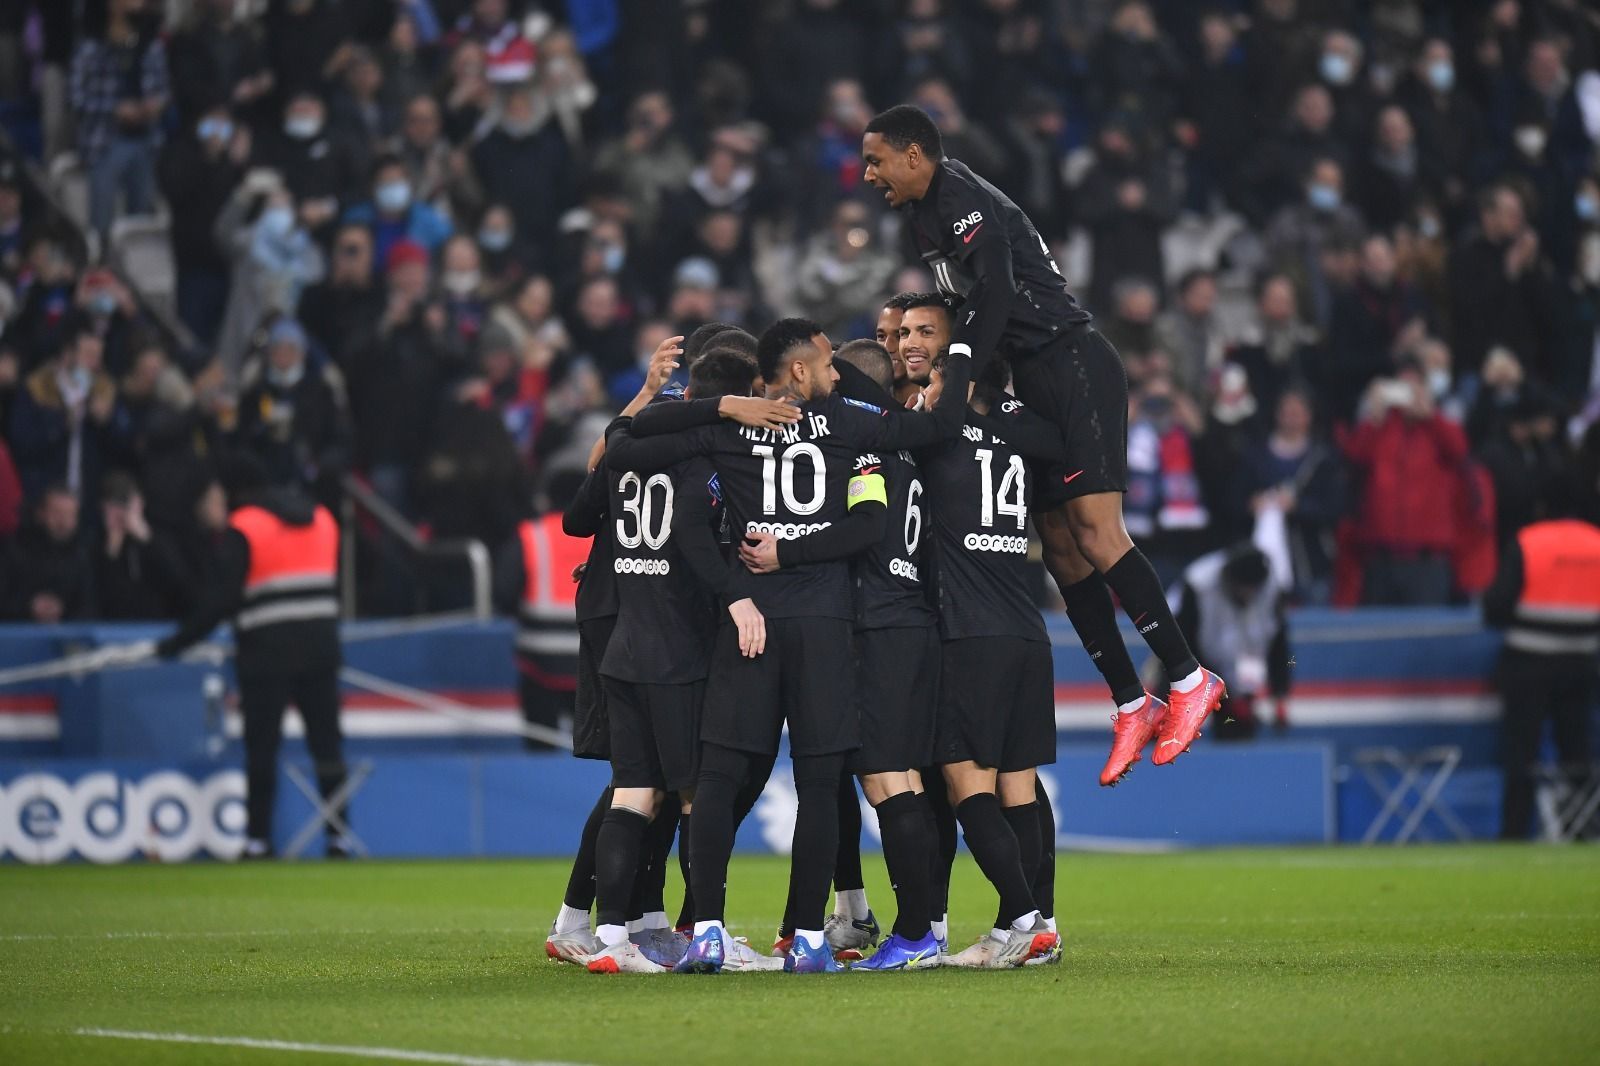 PSG recorded their 12th Ligue 1 win of the season.